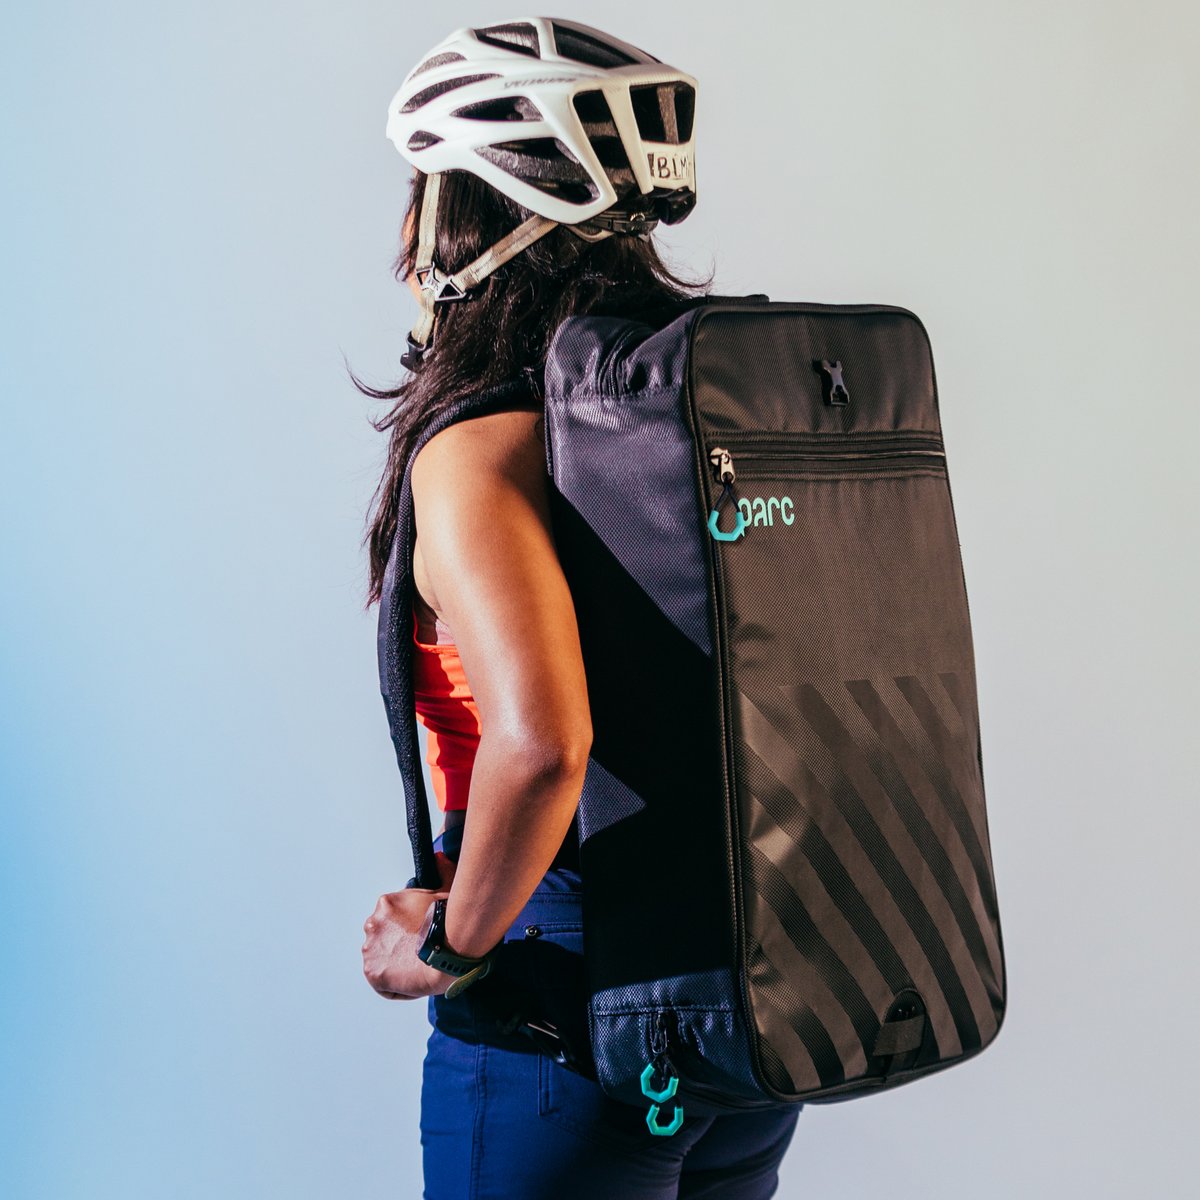 Parc cycling gear bag worn by female cyclist as a backpack for hands free cycling gear transportation and storage.